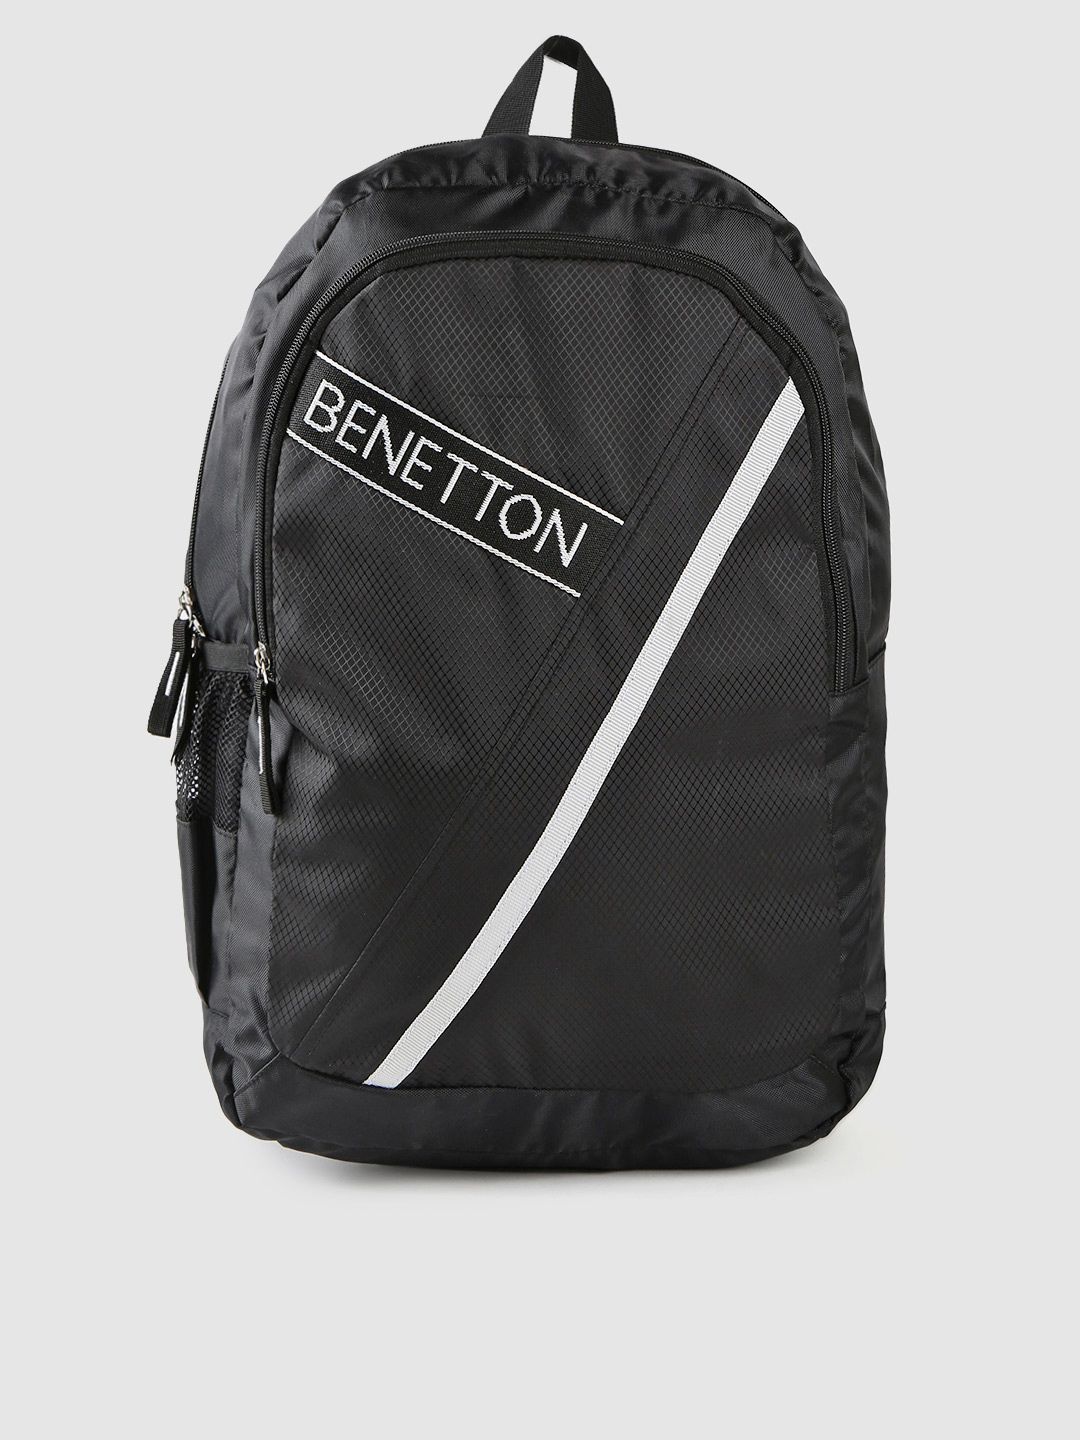 United Colors of Benetton Unisex Black Printed Laptop Backpack Price in India